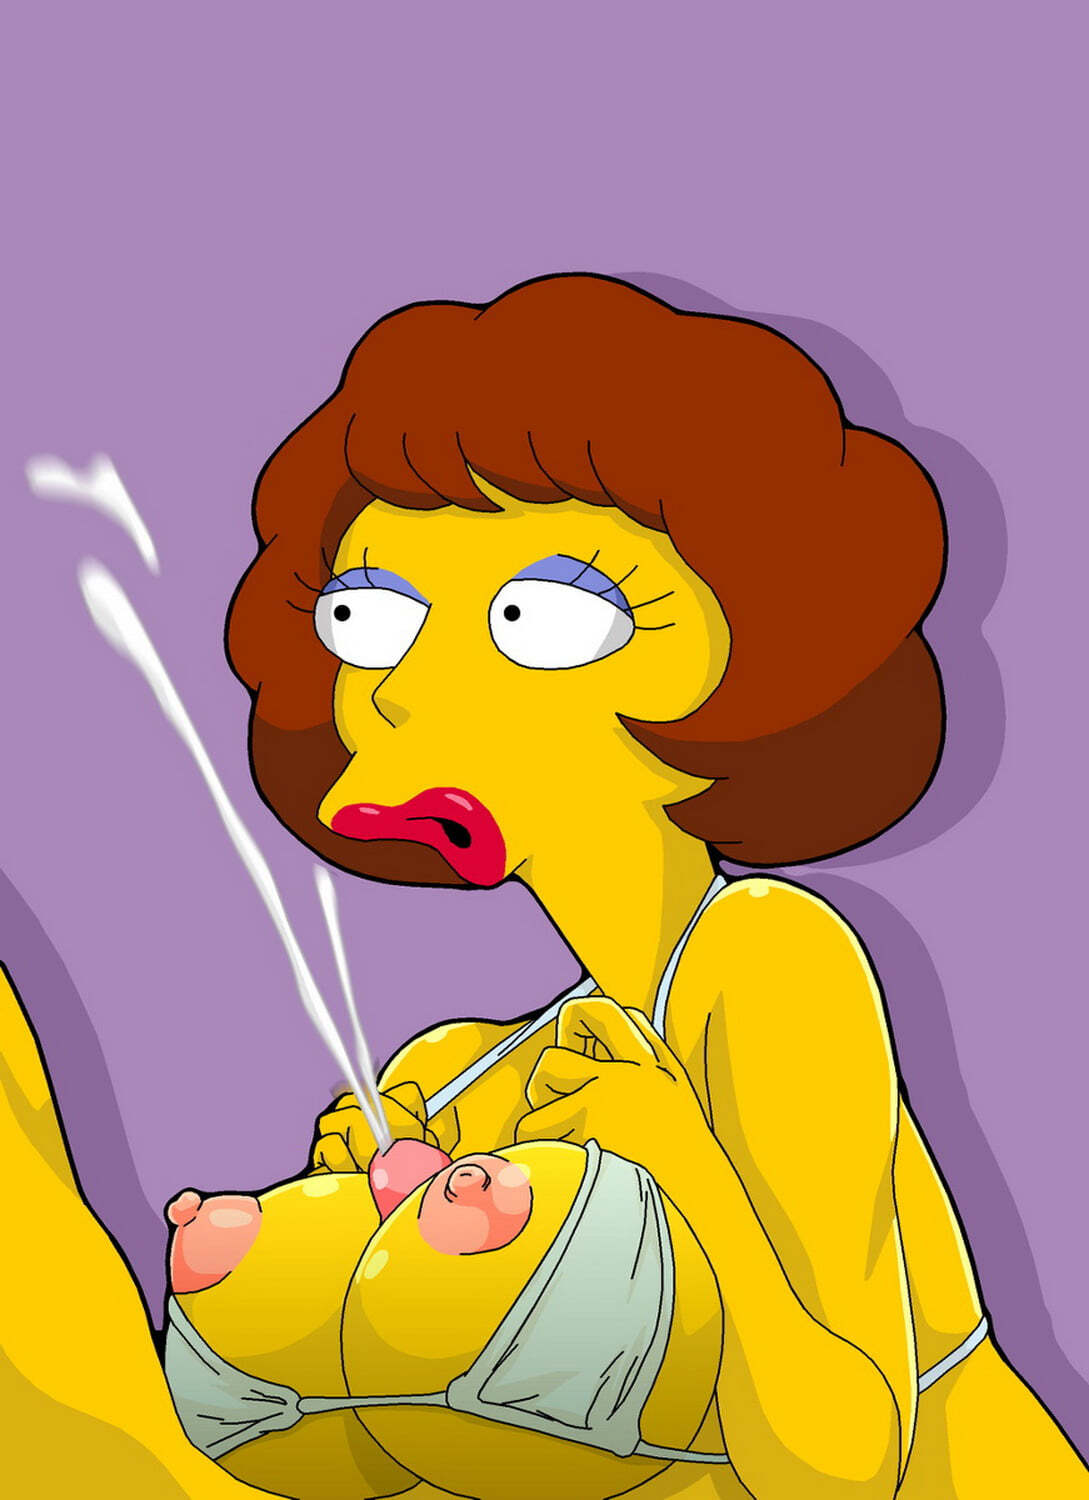 Maude flanders porn - 🧡 Marge Simpson and Maude Flanders Pussy Licking Tit...